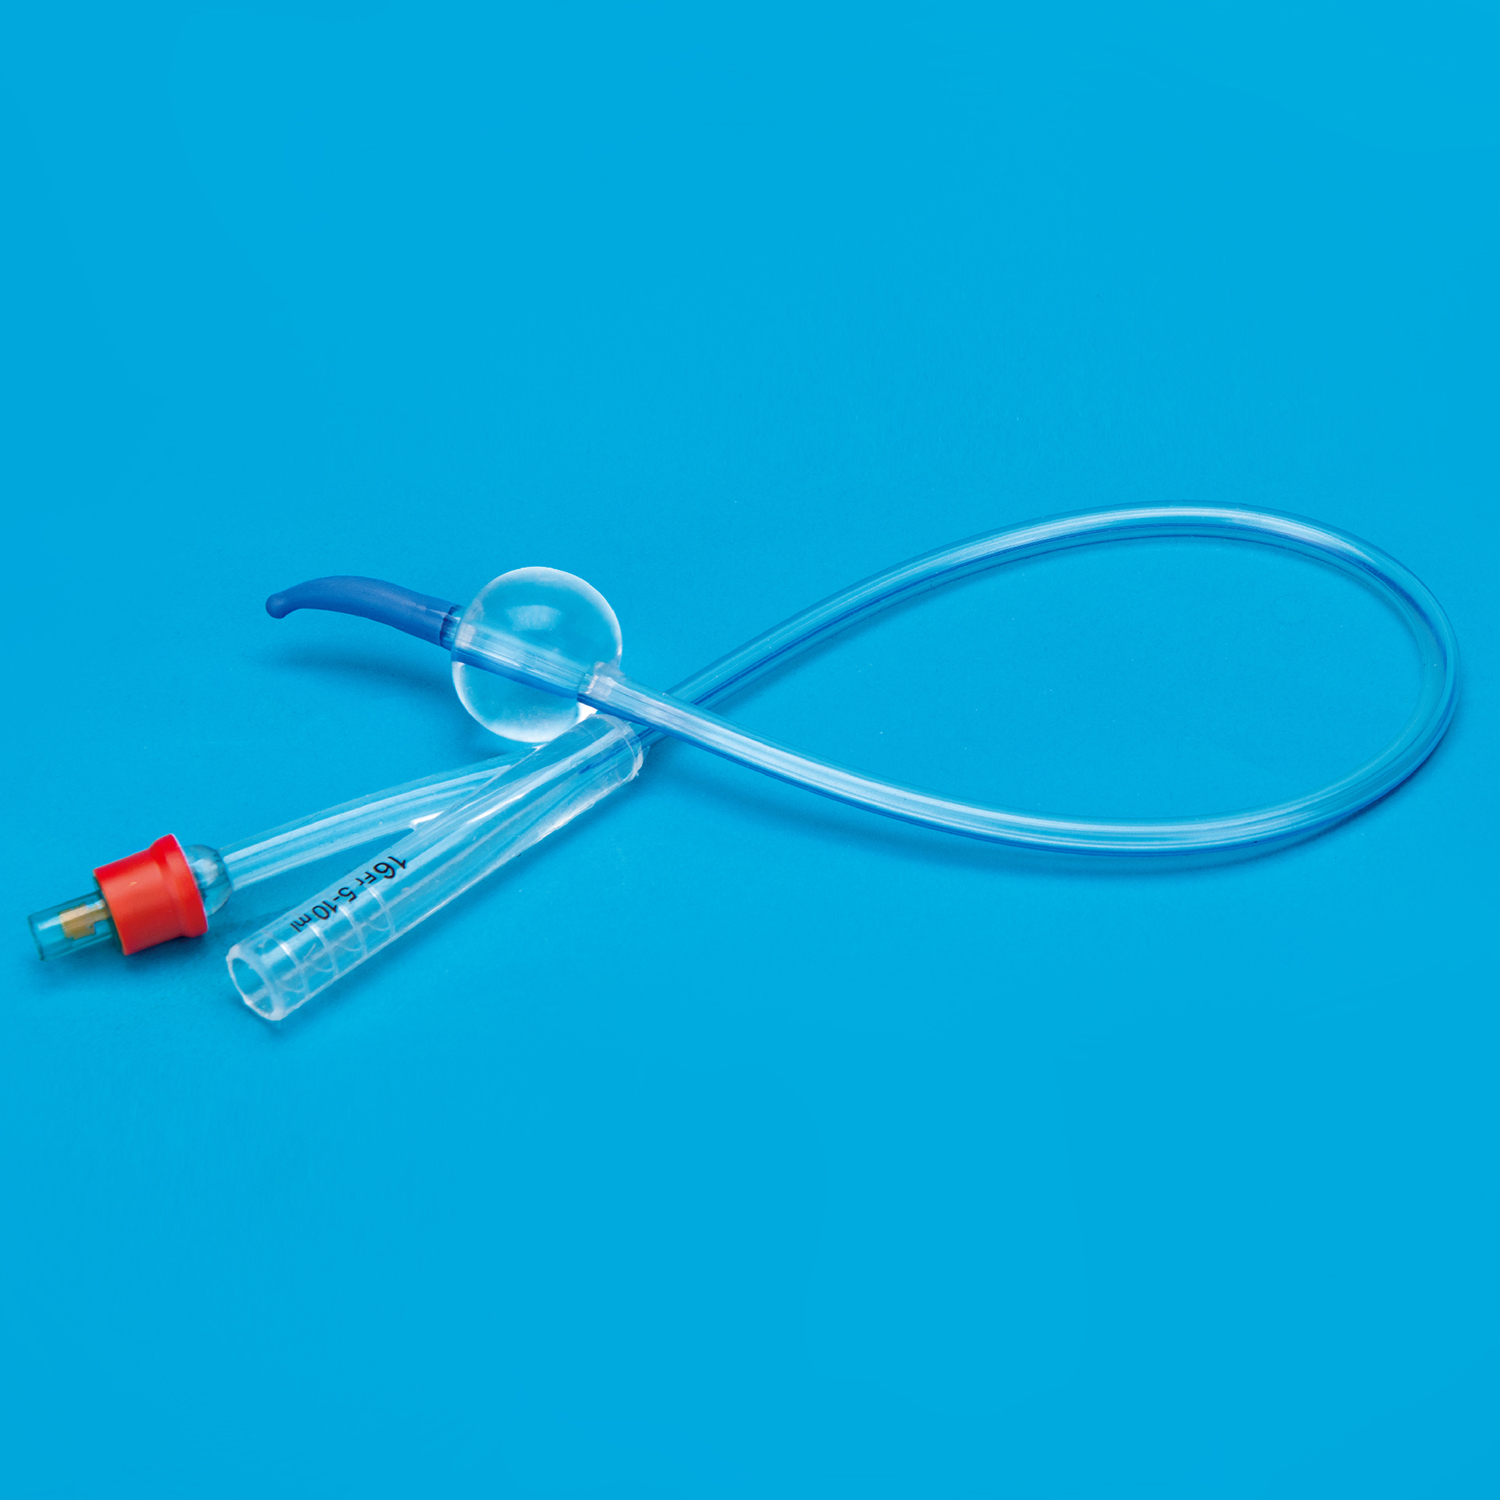 Tiemann Coude Tip All 2 Way Silicone Urinary Urethral Catheter Normal Balloon Factory